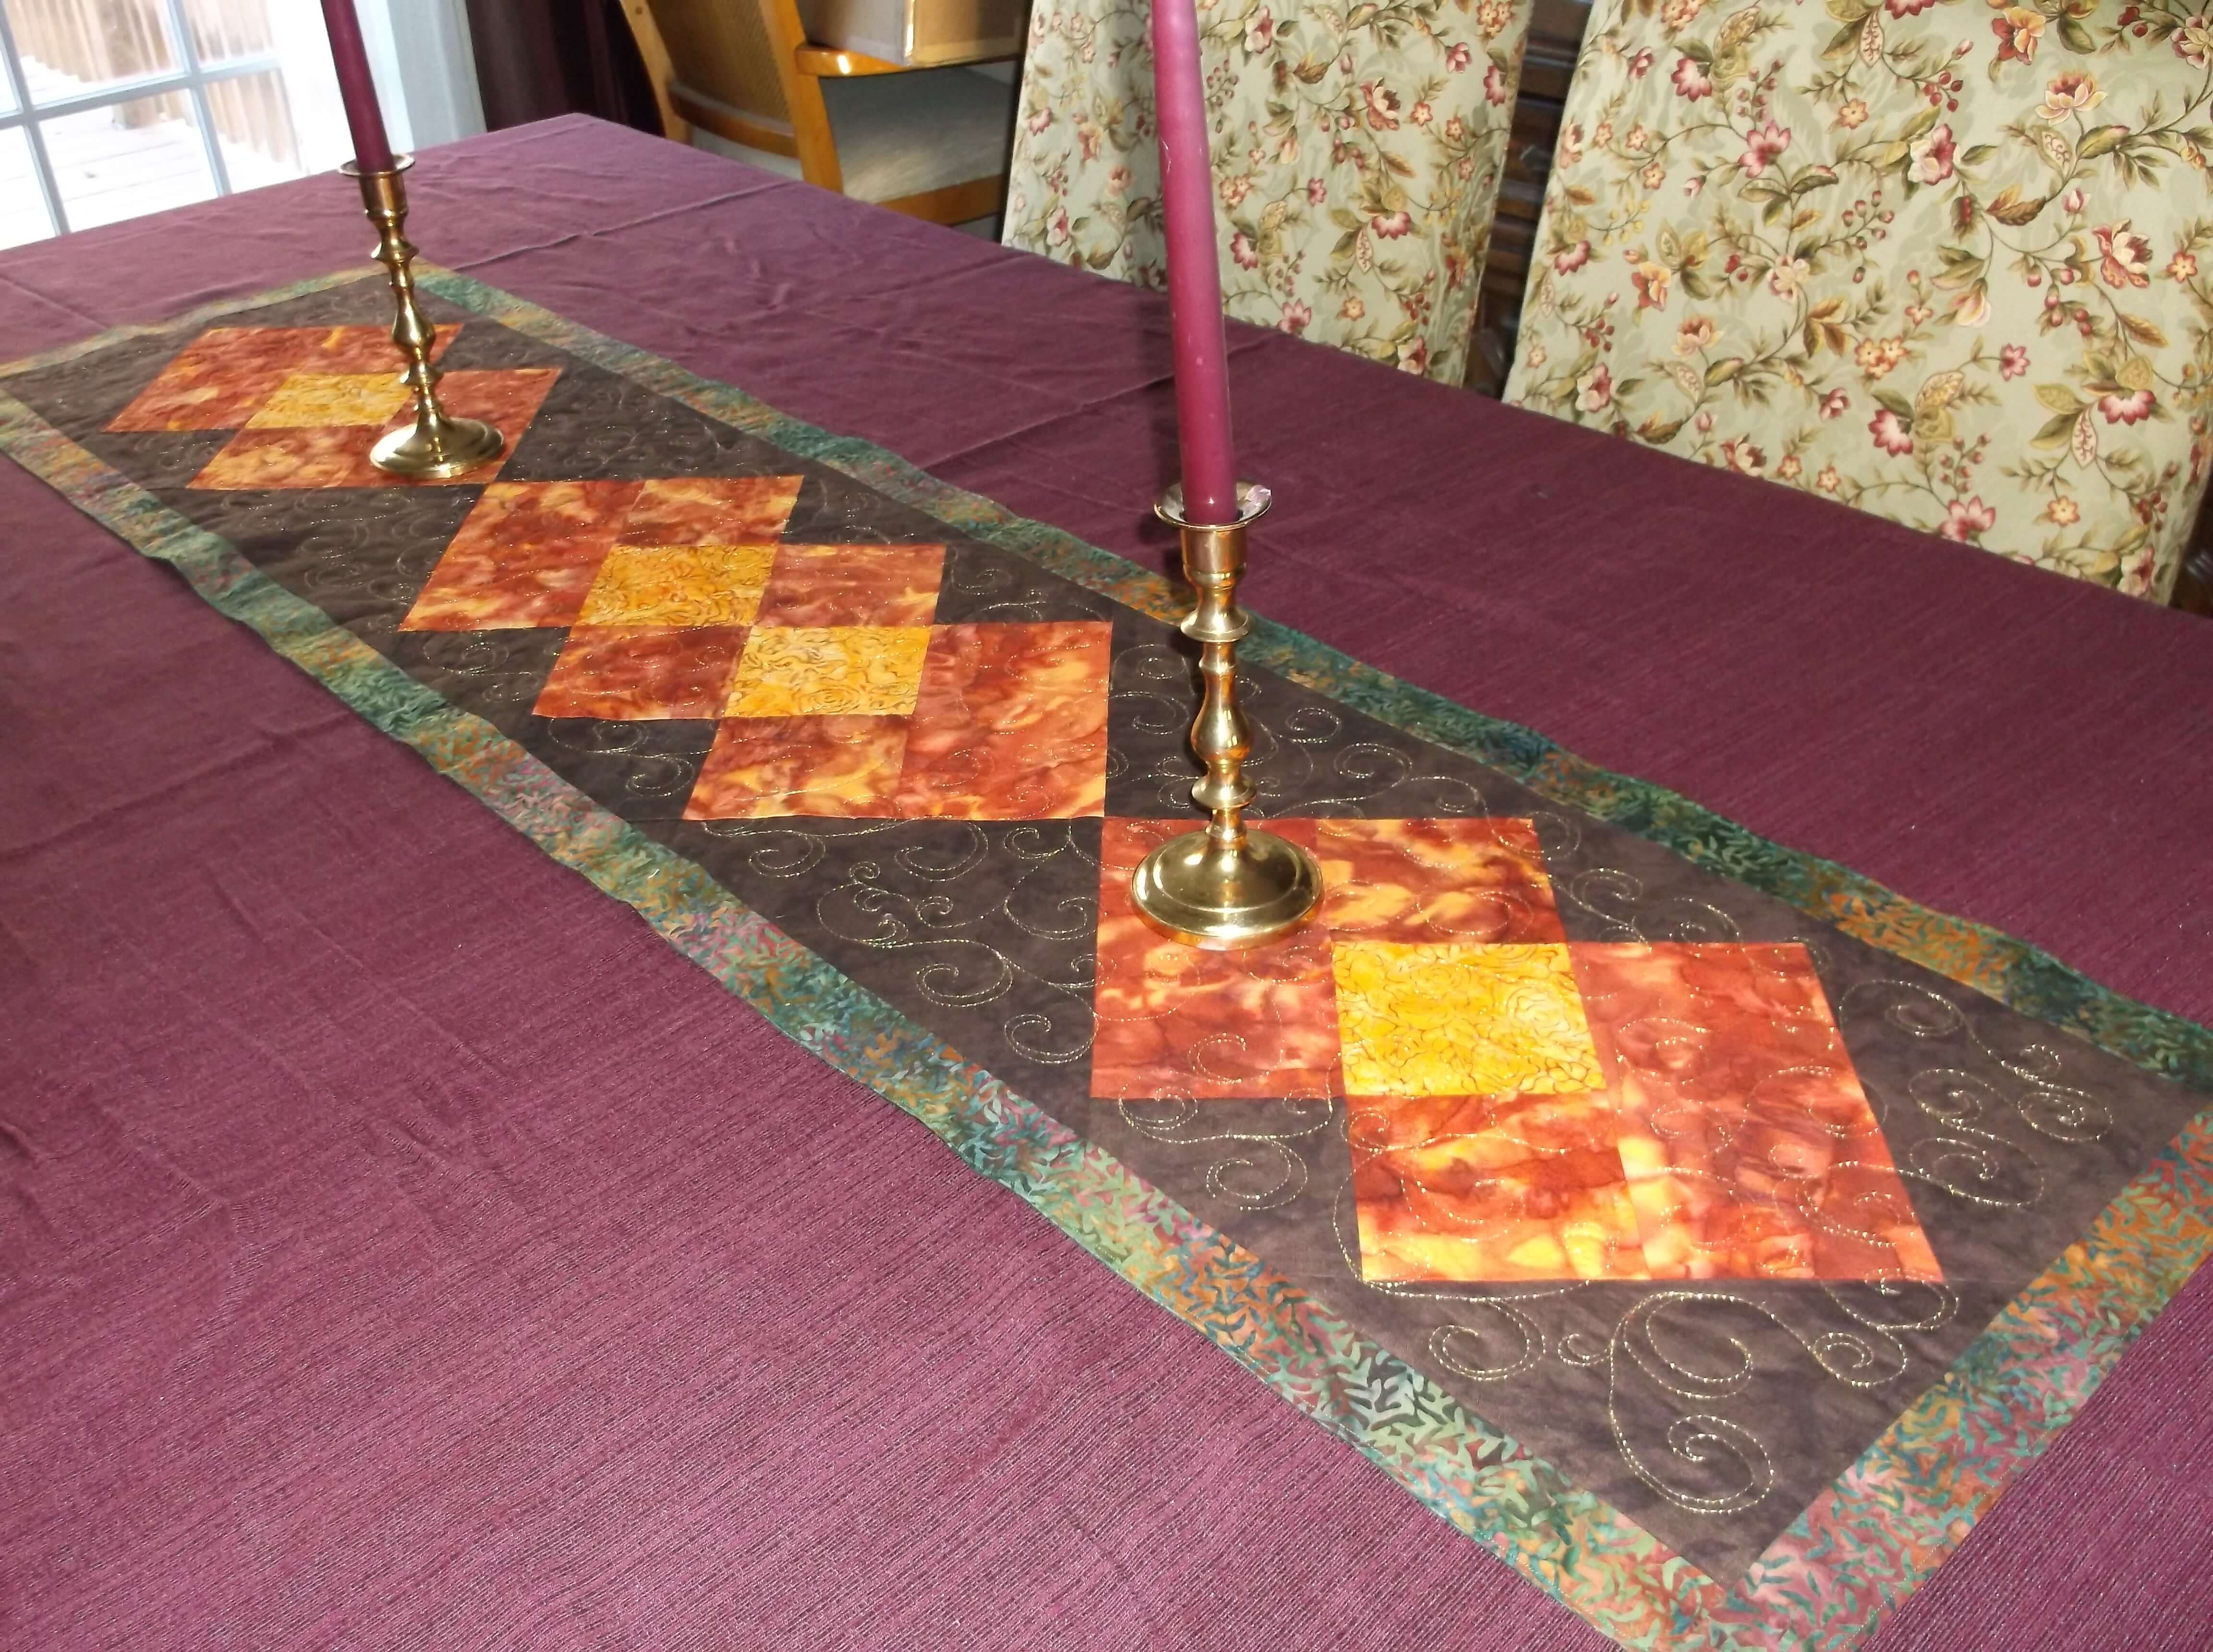 Fall/Autumn Table Runner, Reversible, Christmas on reverse, green trees, white/cream, brown, rust, gold, by Amy Krasnansky